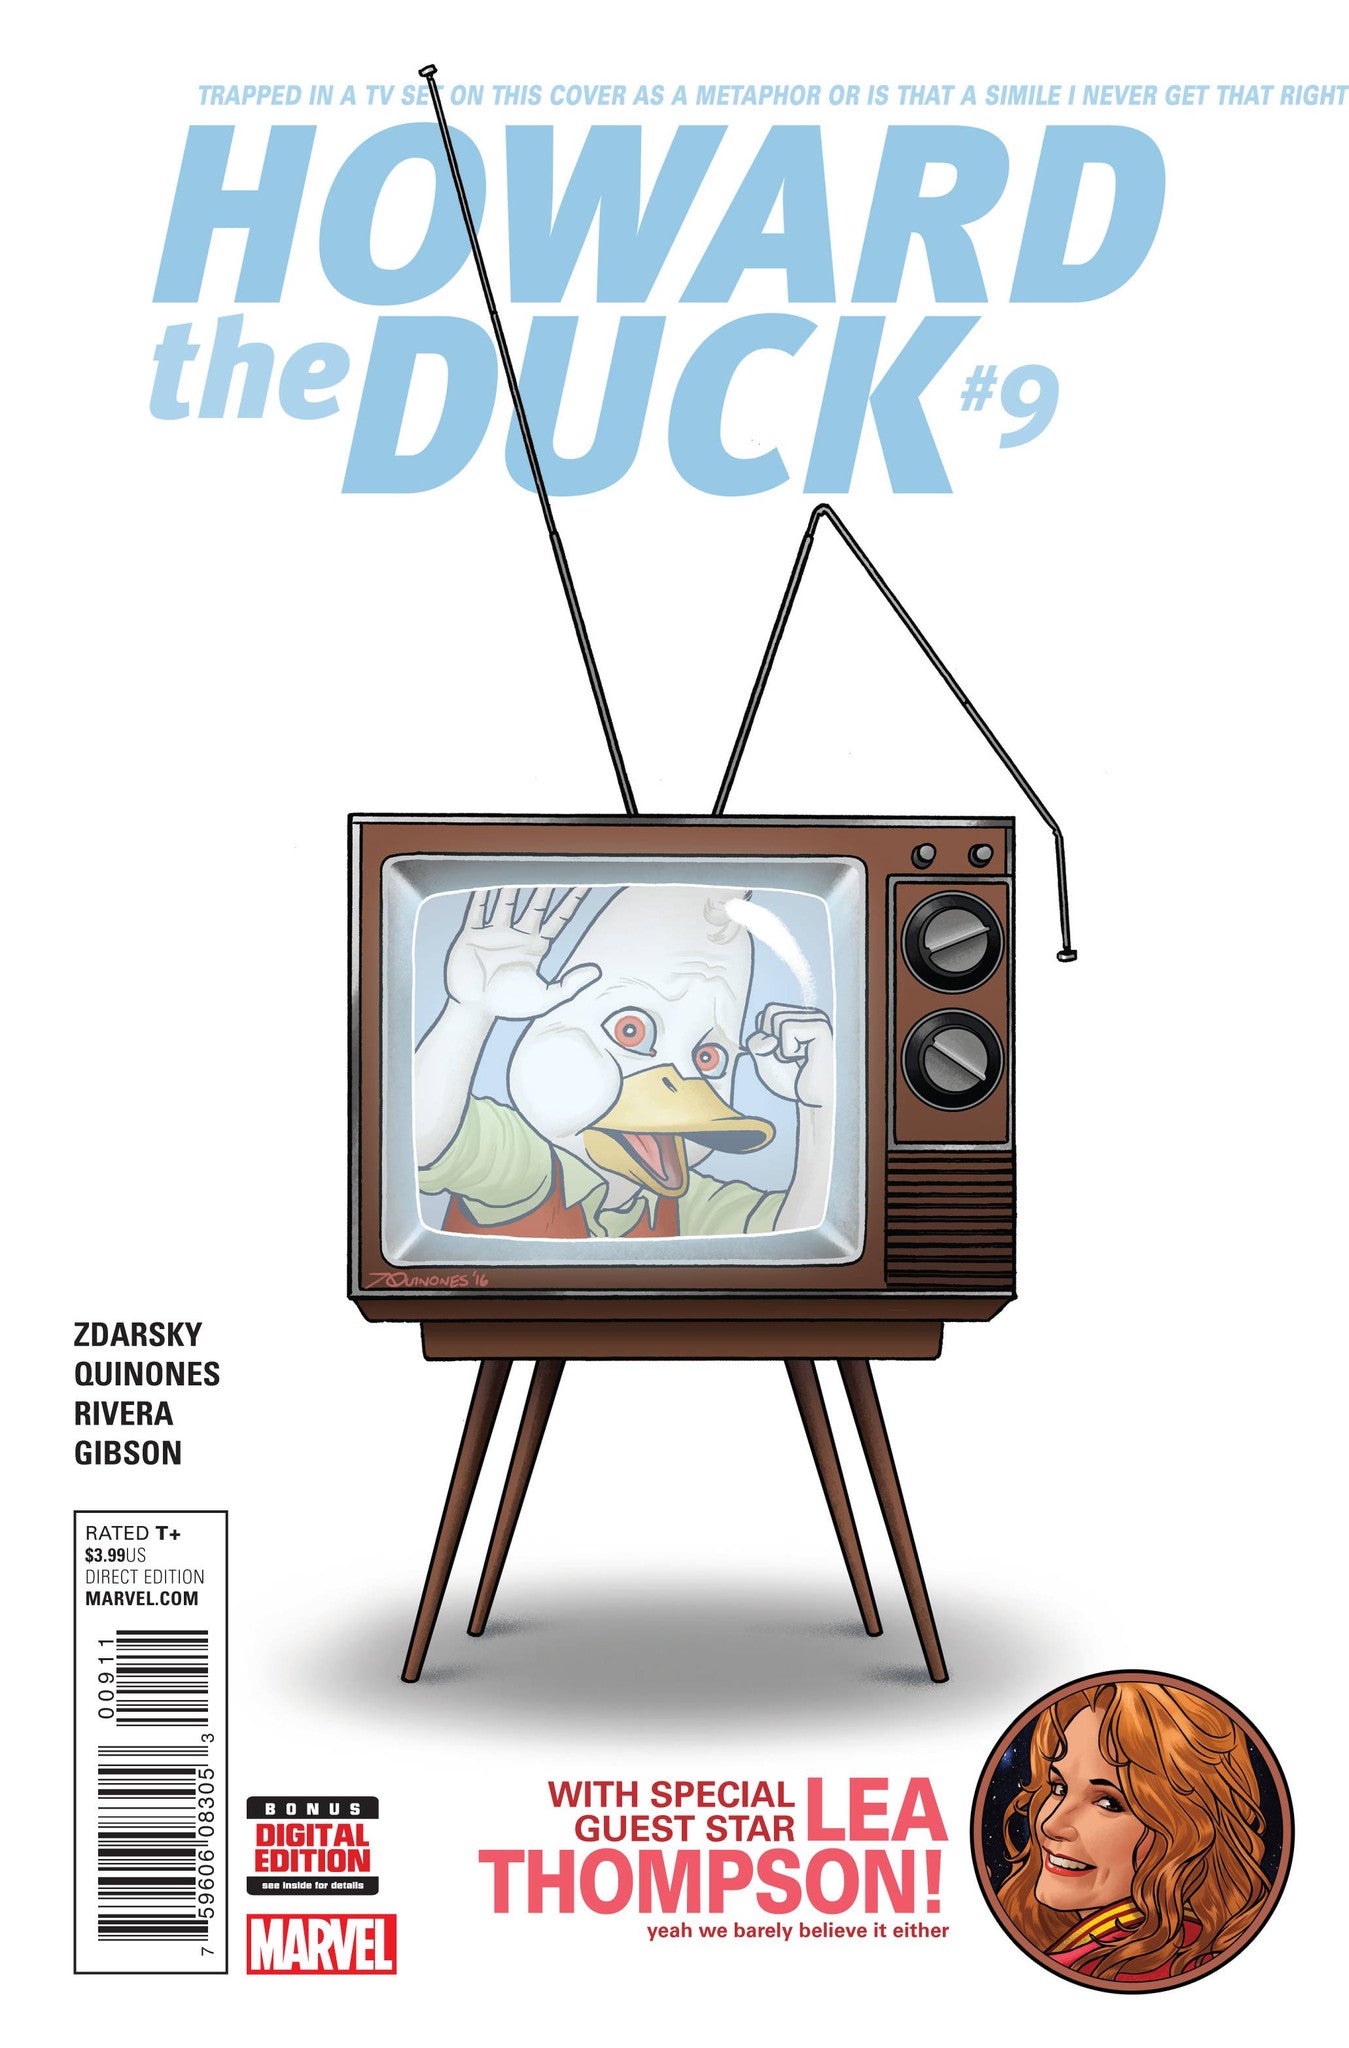 HOWARD THE DUCK #9 COVER